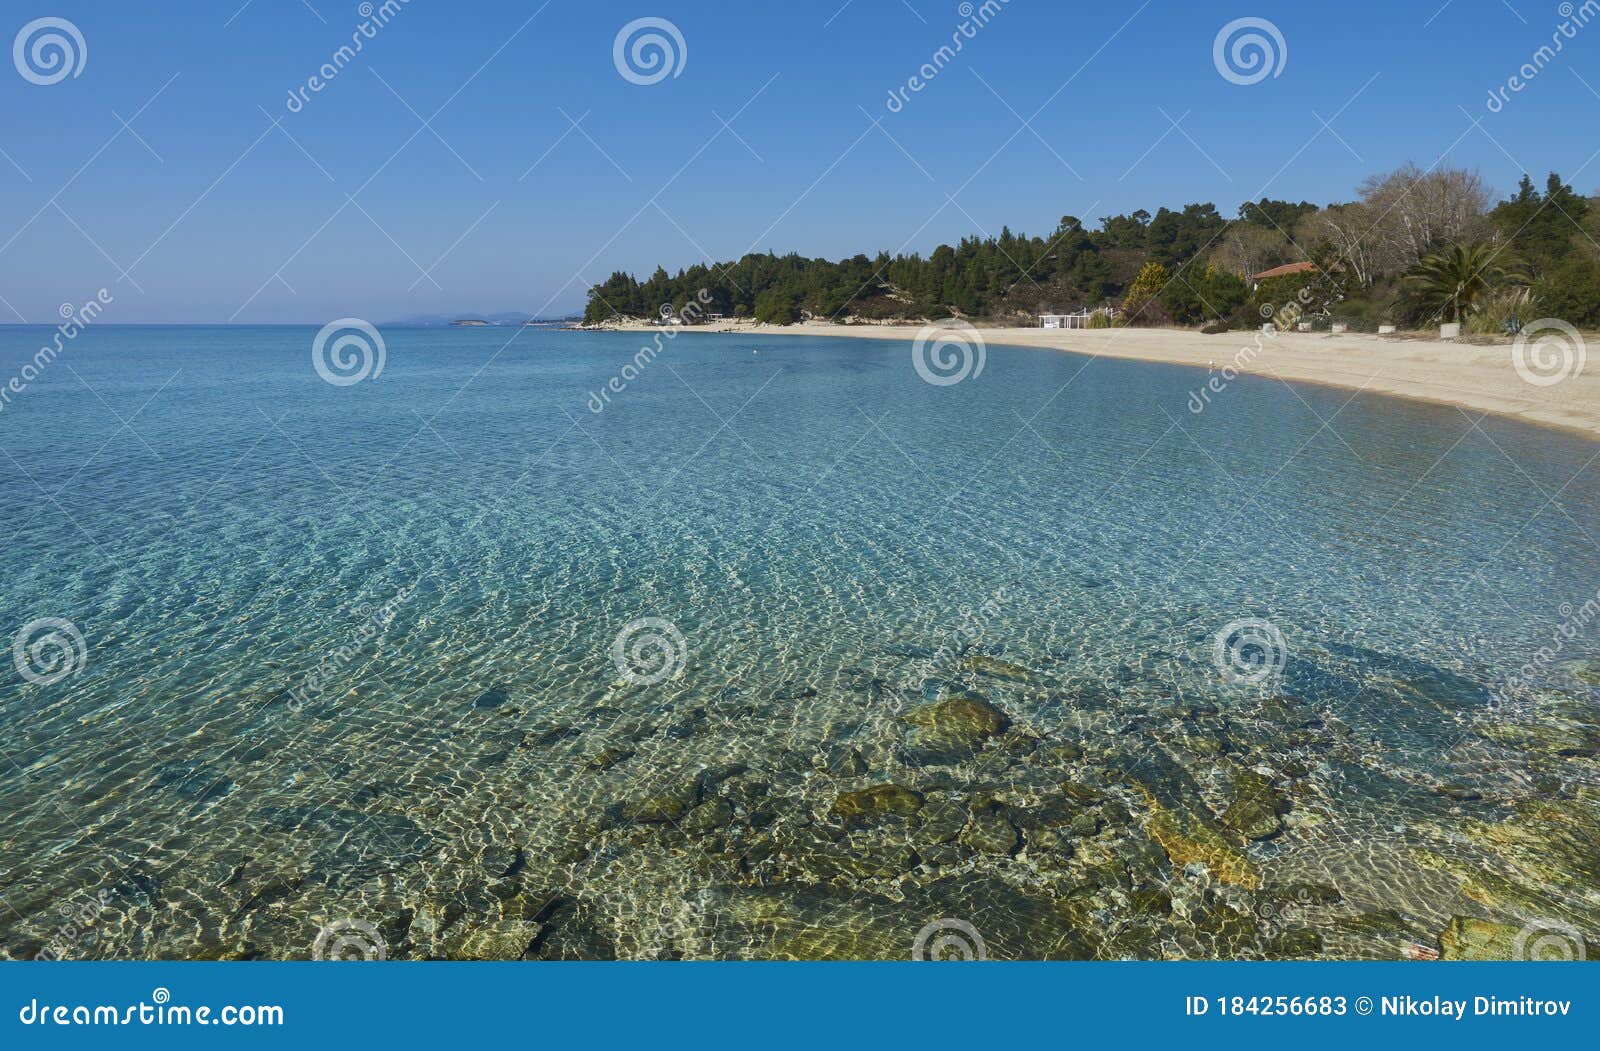 clear water in greece, sithonia